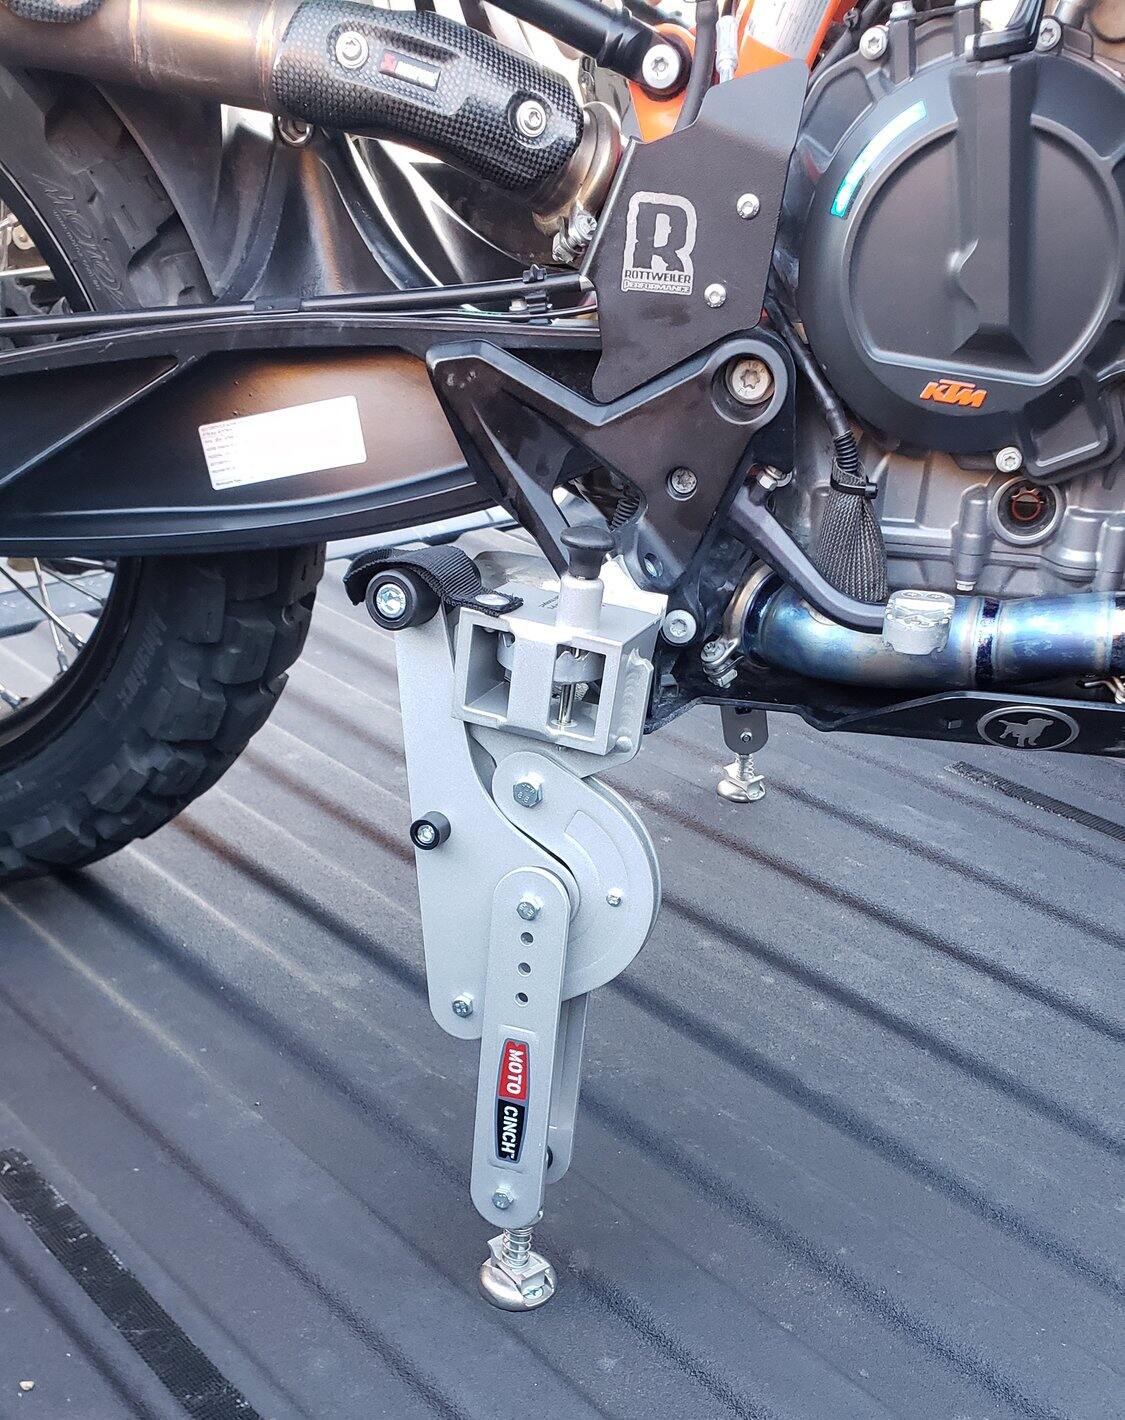 Best foot peg tie downs system. MOTO cinch is the easiest motorcycle tie down ever made